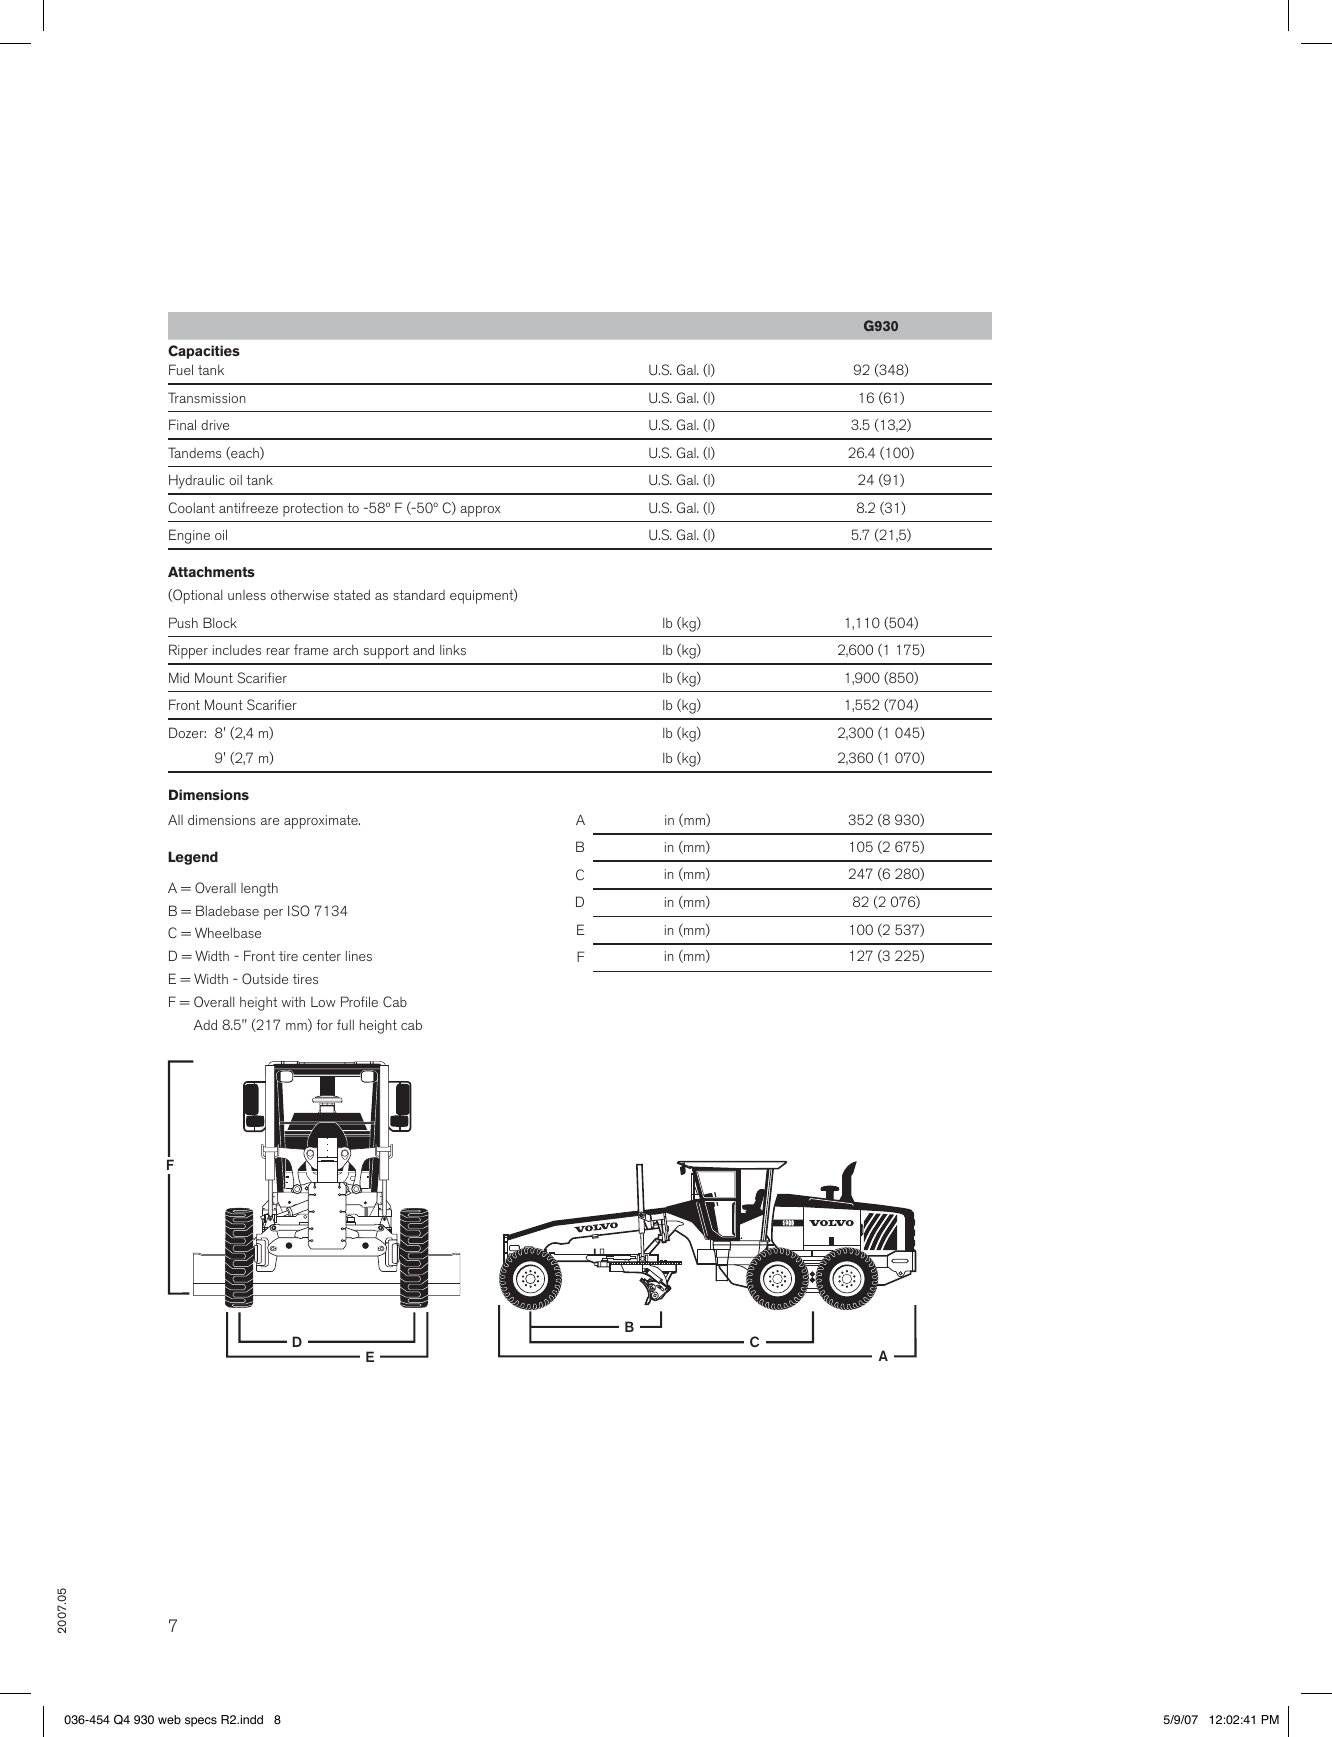 Page 7 of 10 - Volvo Volvo-Motor-Graders-G930-Users-Manual- 036-454 Q4 930 Web Specs R2  Volvo-motor-graders-g930-users-manual